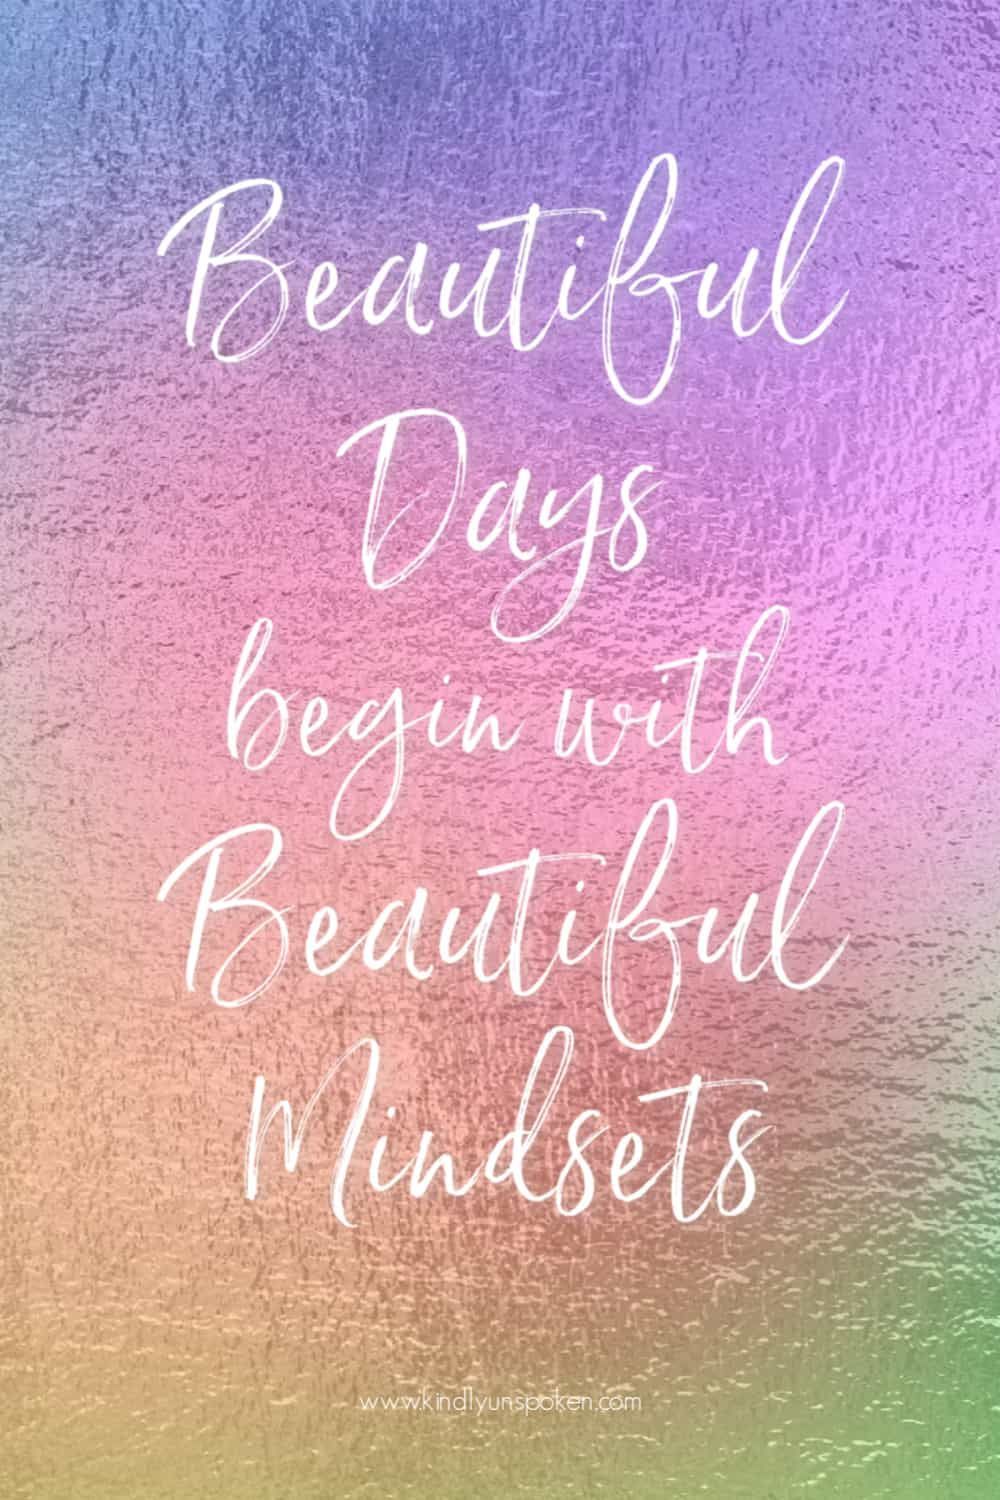 12 Inspirational Quotes for Hard Times (Free Printables) - 12 Inspirational Quotes for Hard Times (Free Printables) -   18 beauty Day inspiration ideas